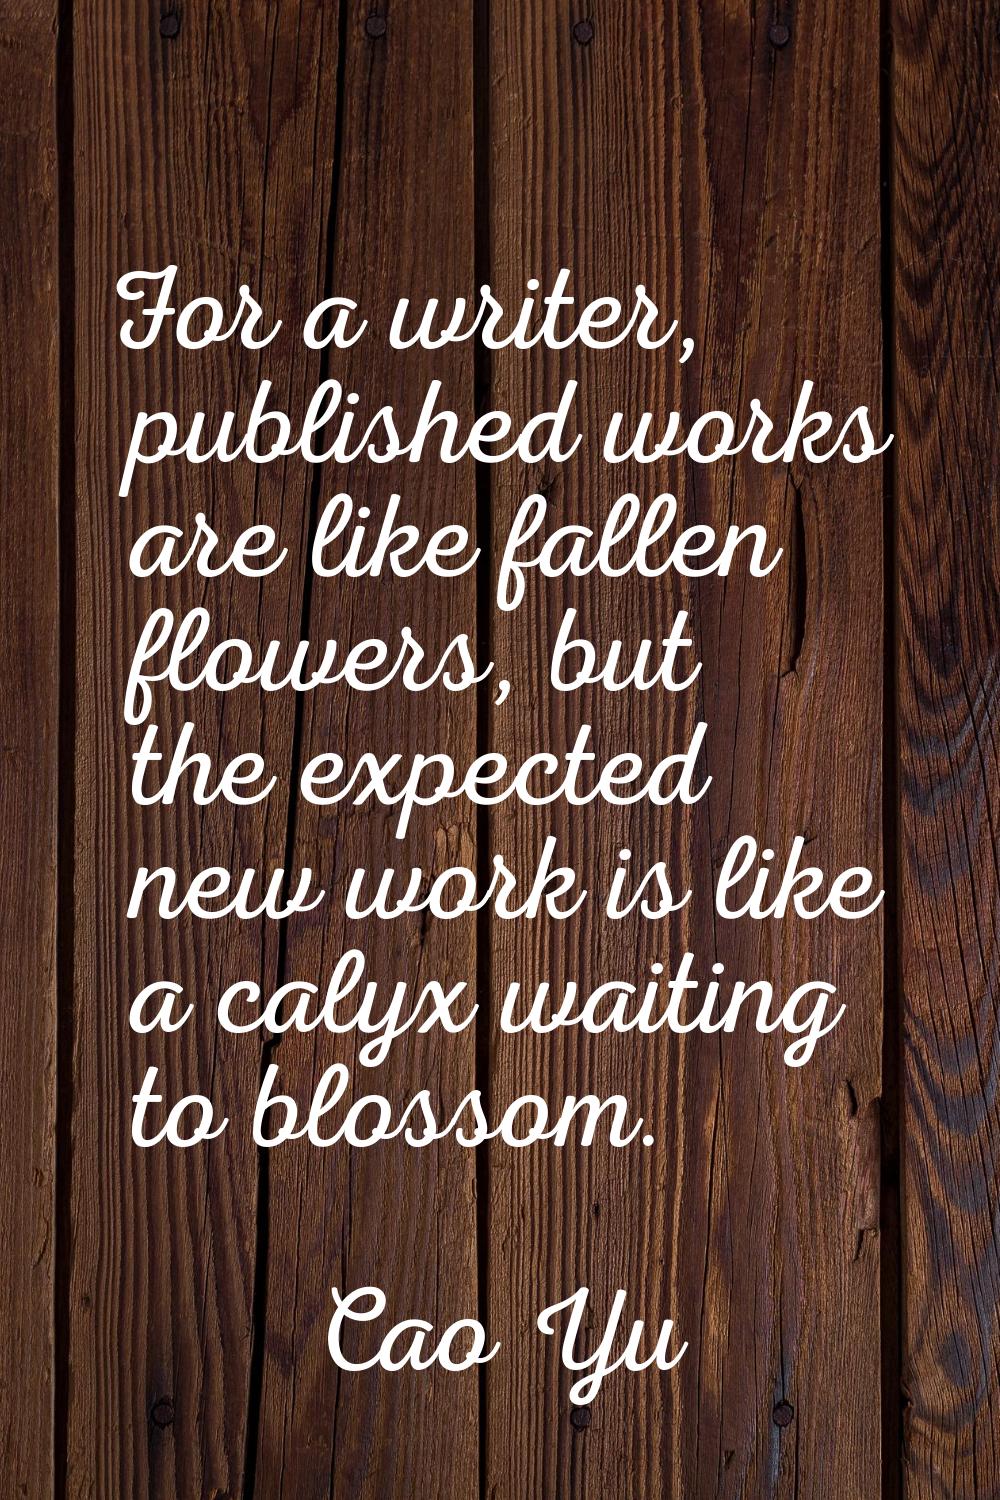 For a writer, published works are like fallen flowers, but the expected new work is like a calyx wa